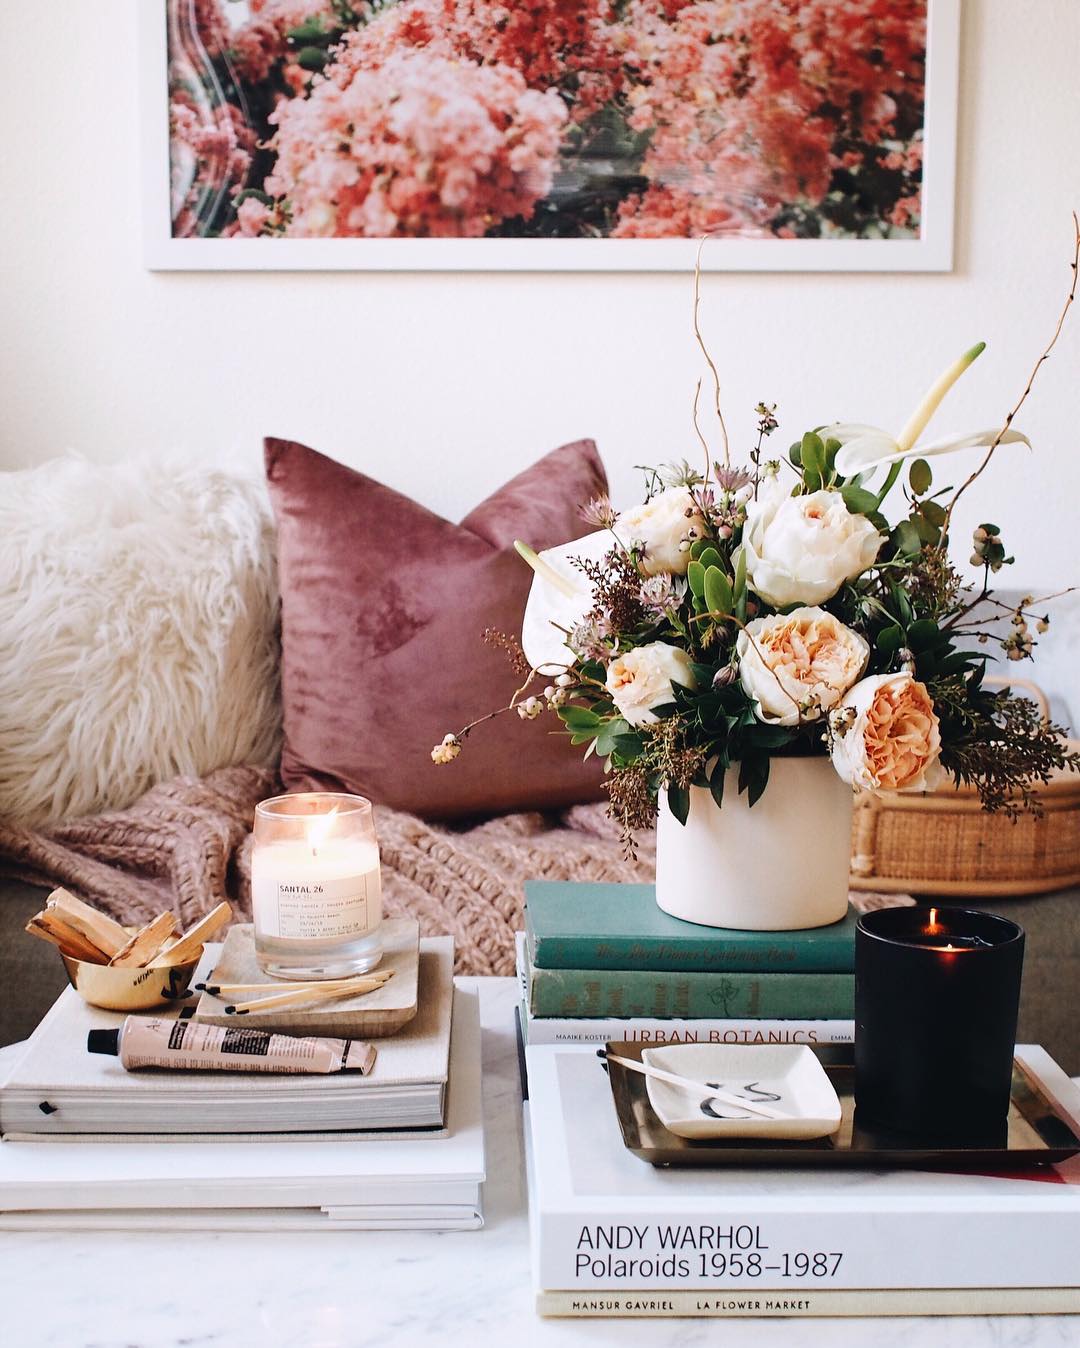 Studio Apartment Ideas: A coffee table can be the perfect stage for your favorite books, candles, and plants. A curated coffee table arrangement will show off your style and tie the room together. If you're looking for something non-traditional, vintage trunks, crates, wood slabs, and tree stumps make excellent alternatives.